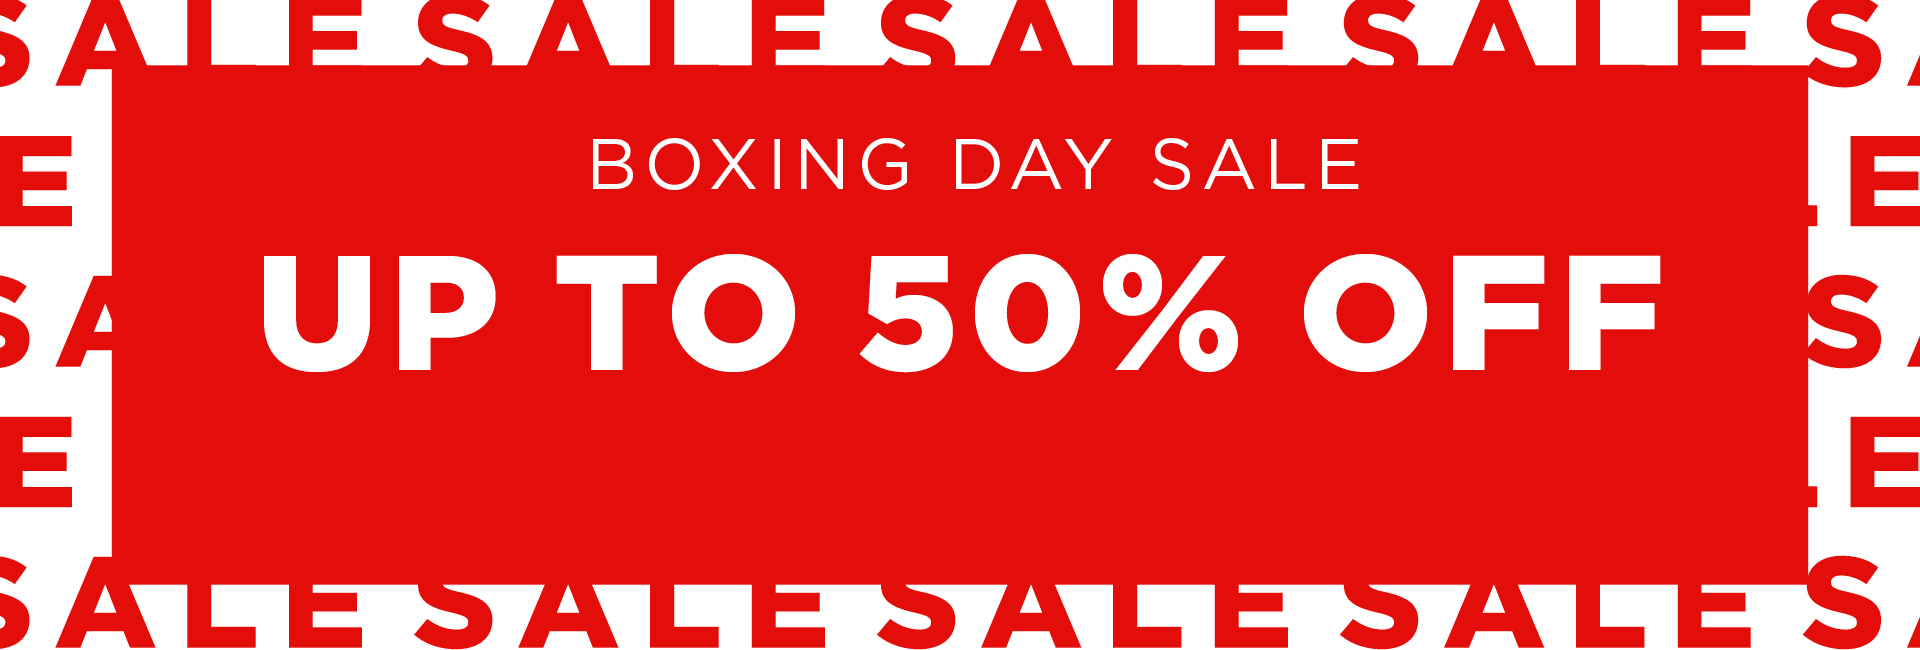 Skechers Boxing day sale - Up to 50% OFF selected styles, Free shipping $130+